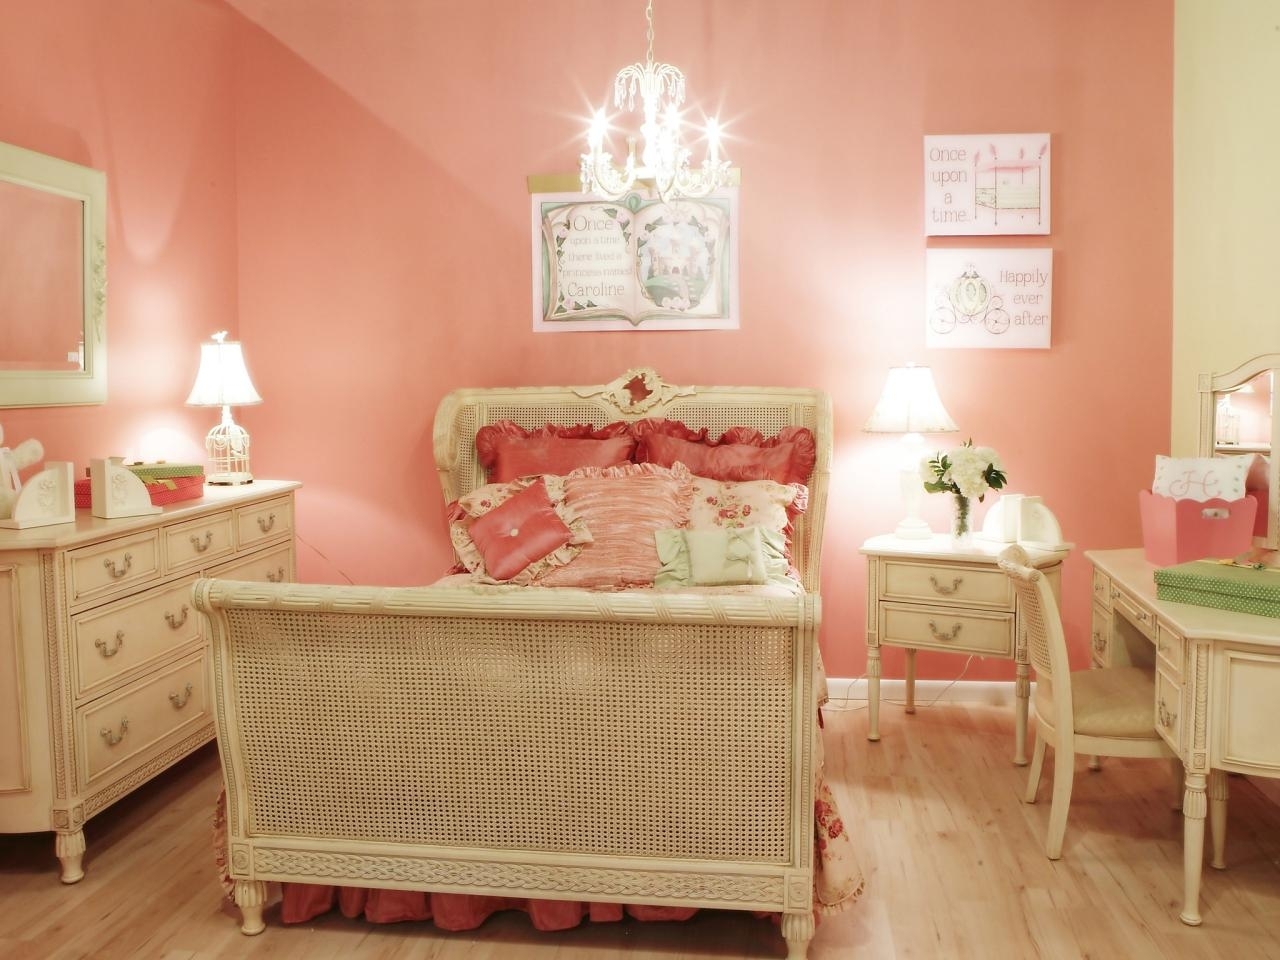 10 Wonderful Painting Ideas For Girls Room %name 2022